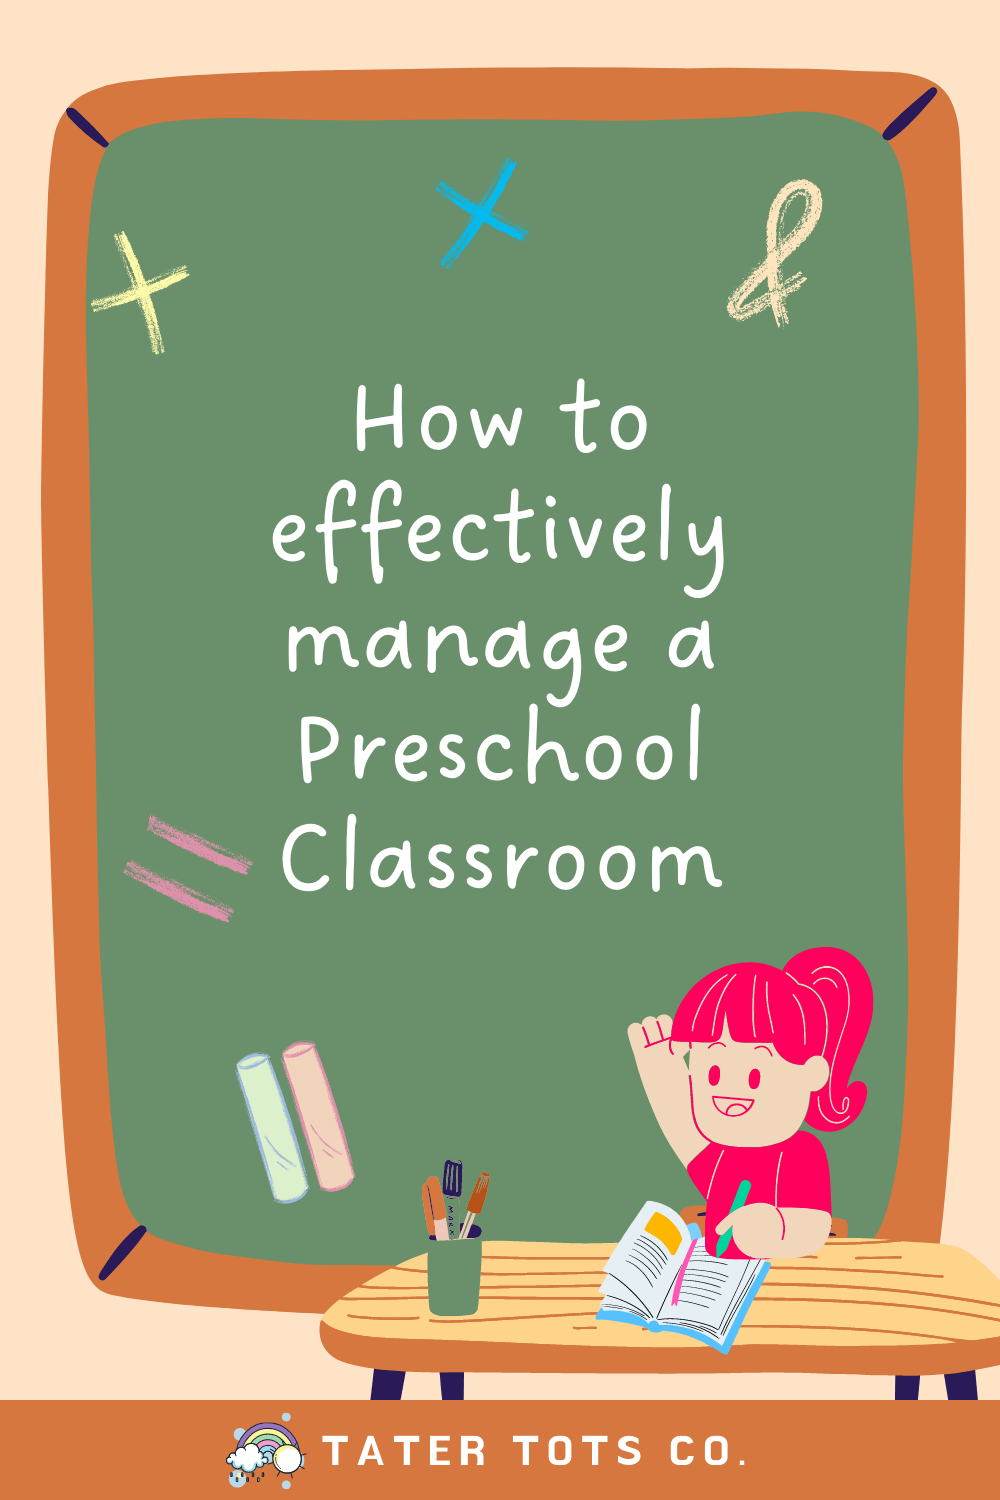 How to effectively manage a Preschool Classroom 001